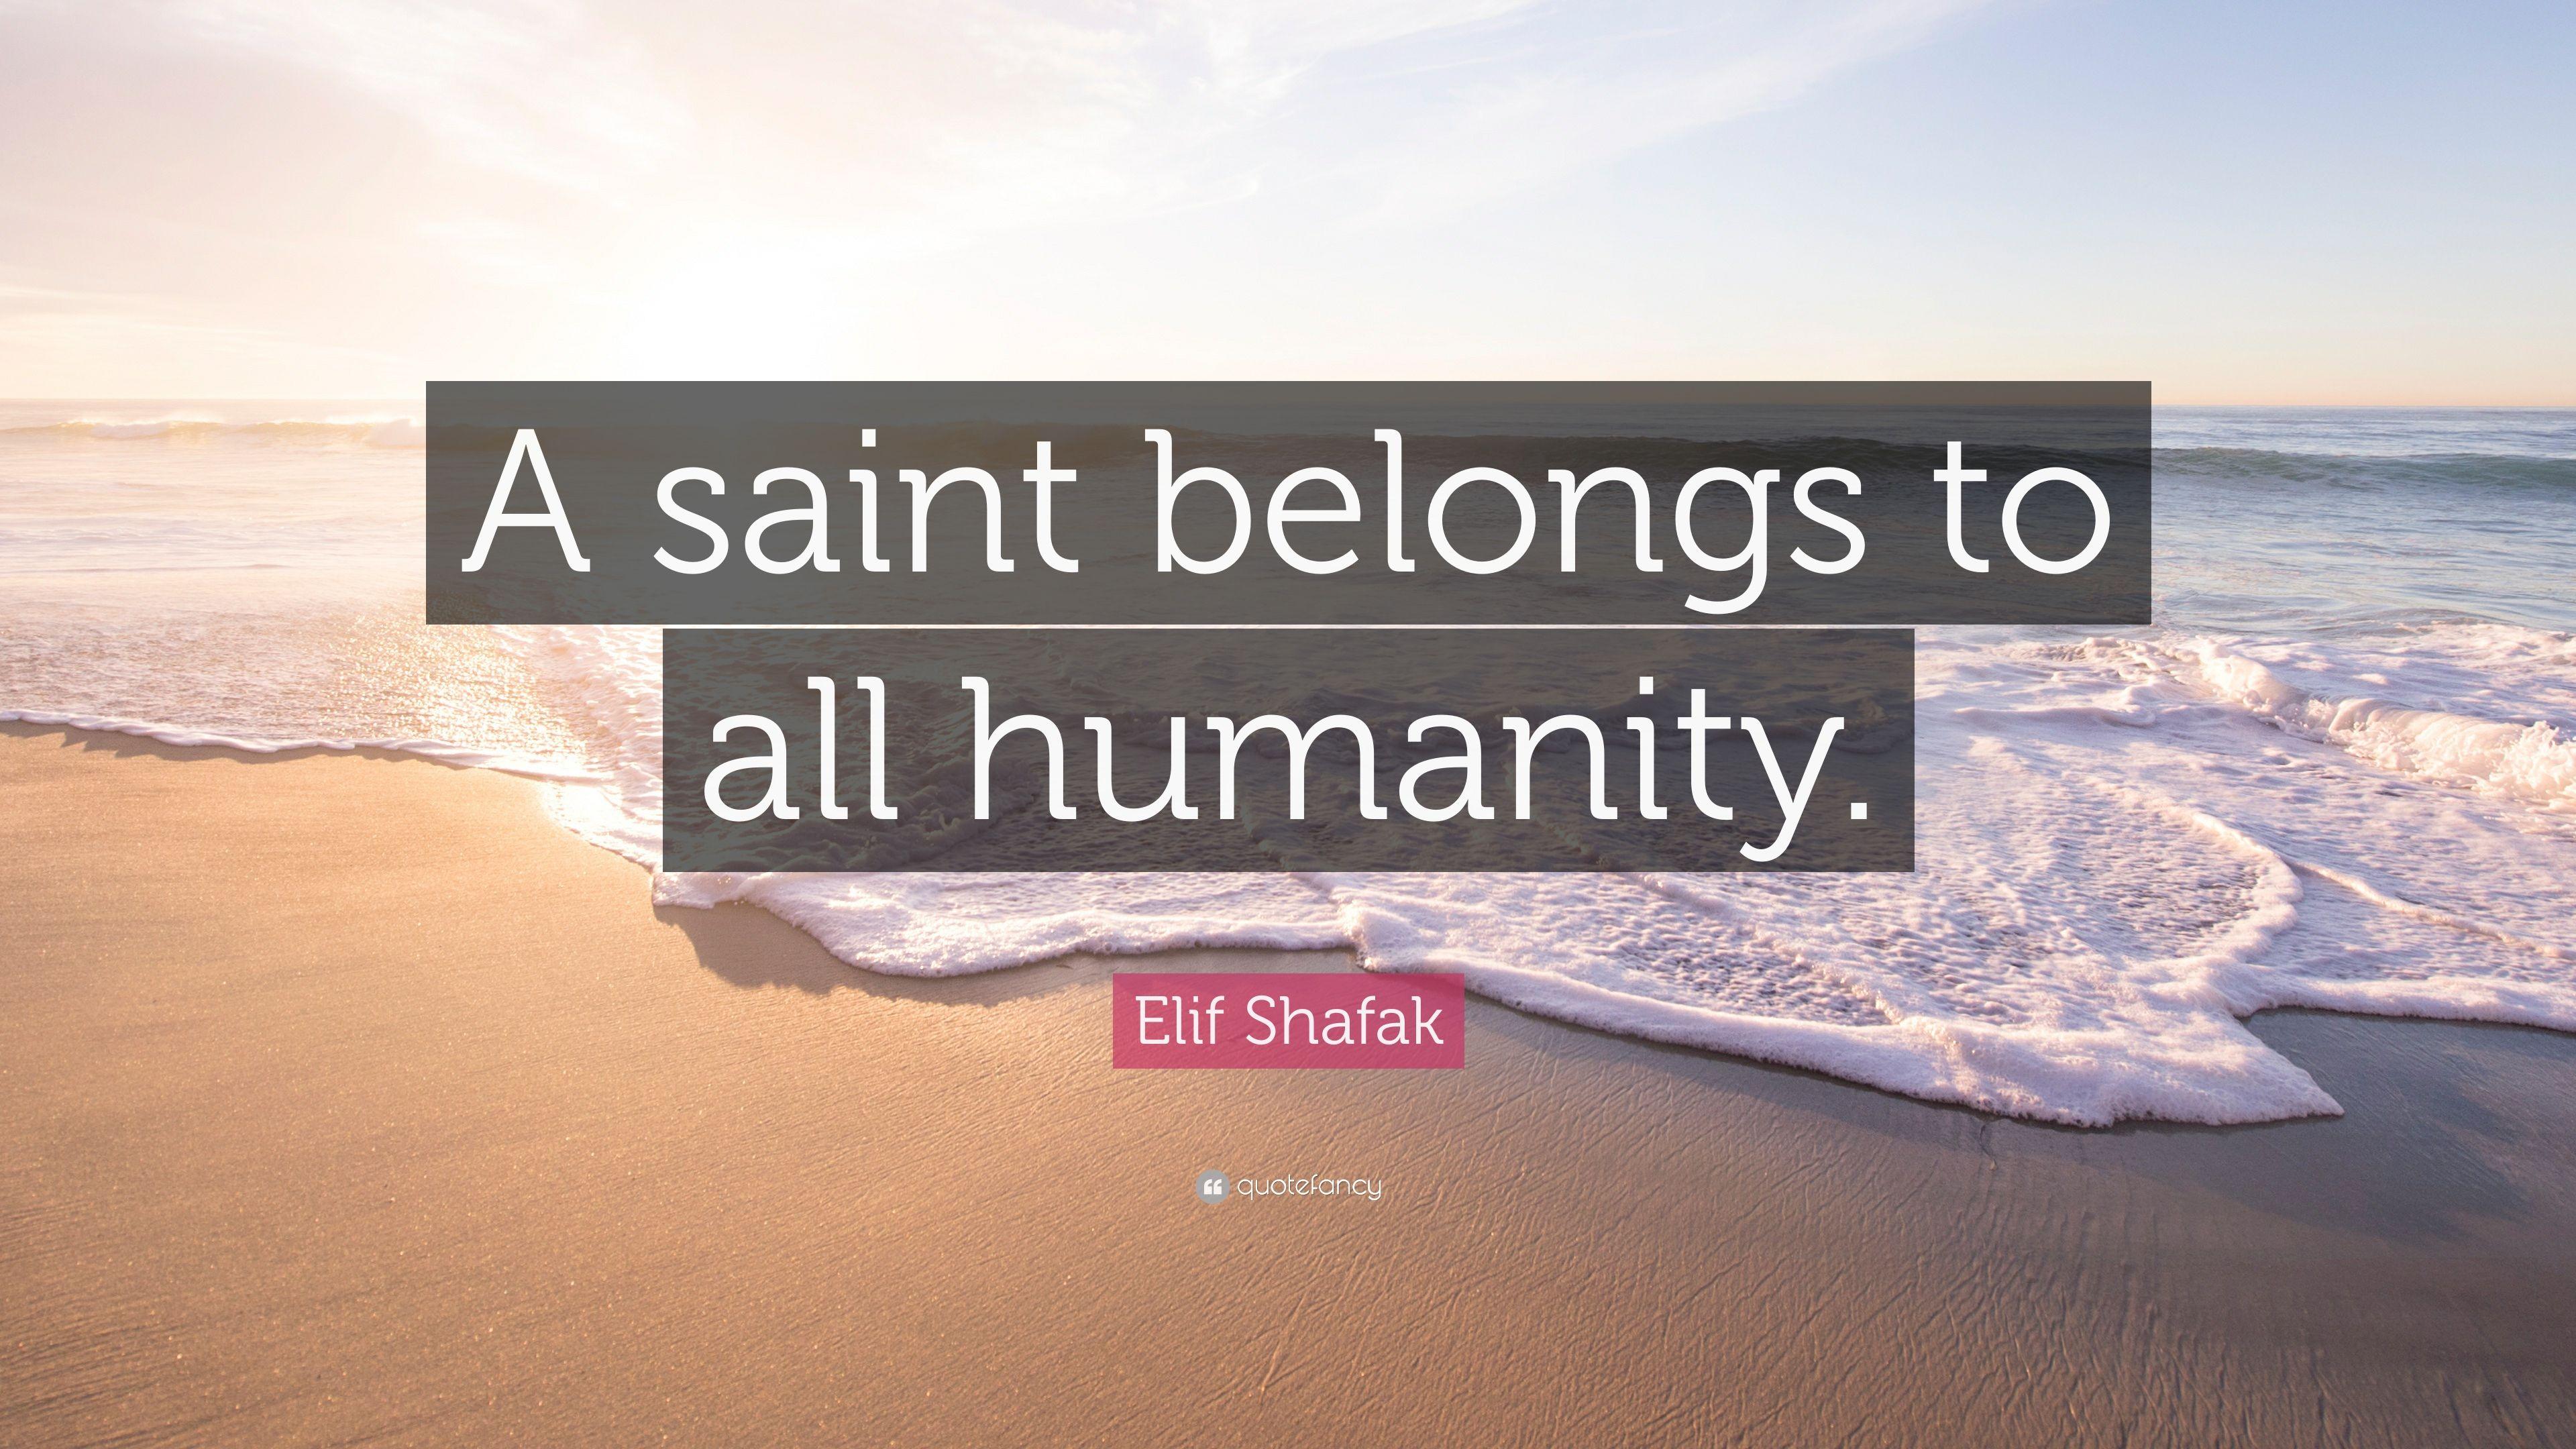 Elif Shafak Quote: “A saint belongs to all humanity.” 9